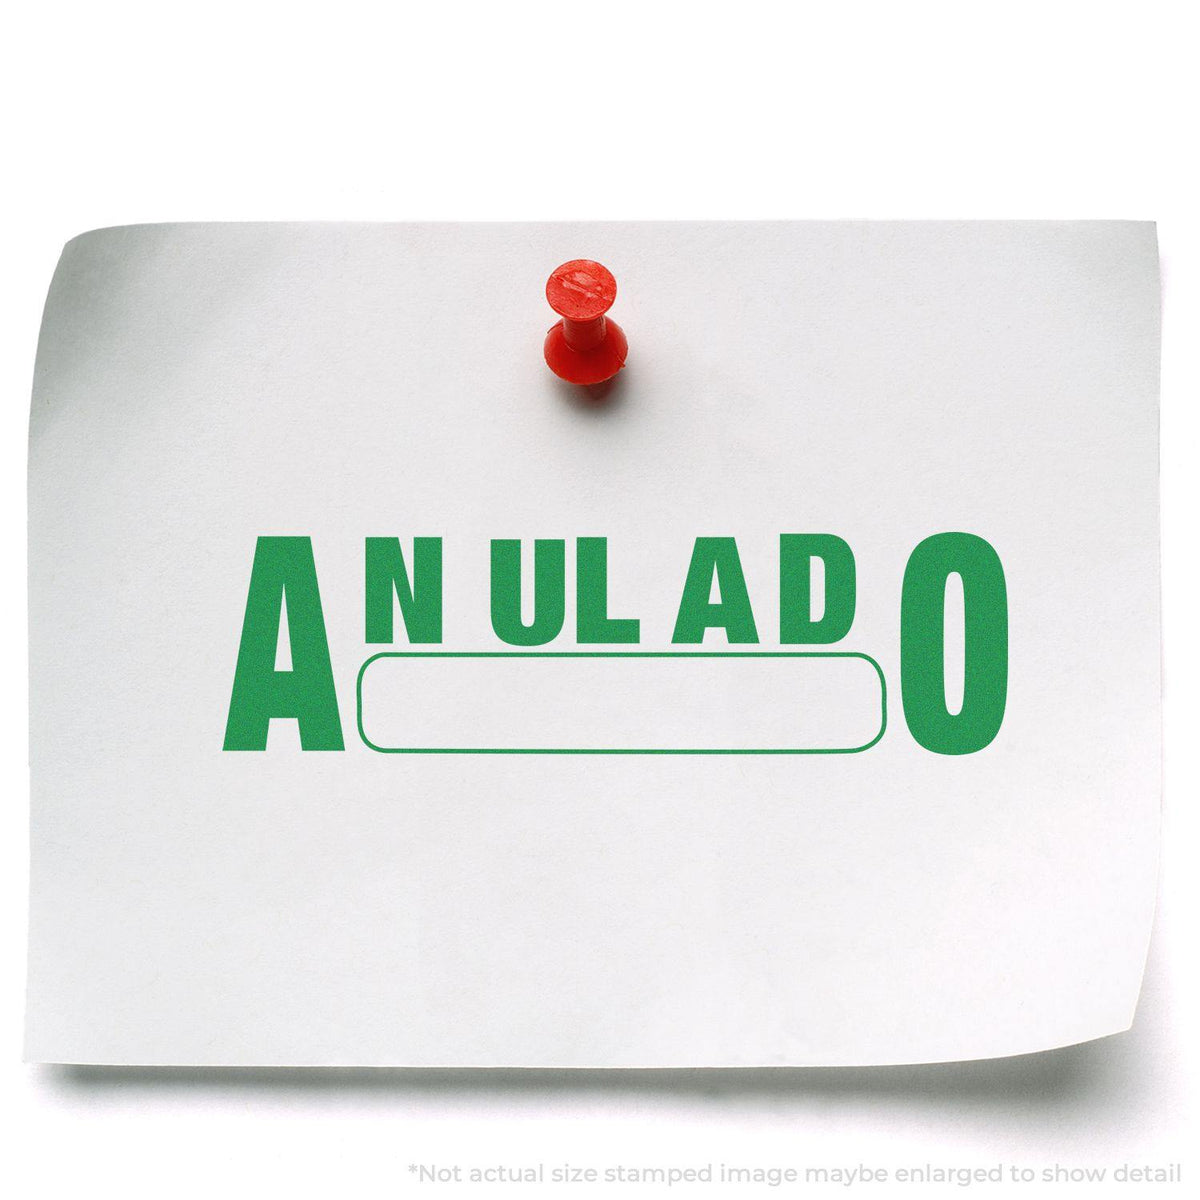 Anulado Rubber Stamp In Use Photo